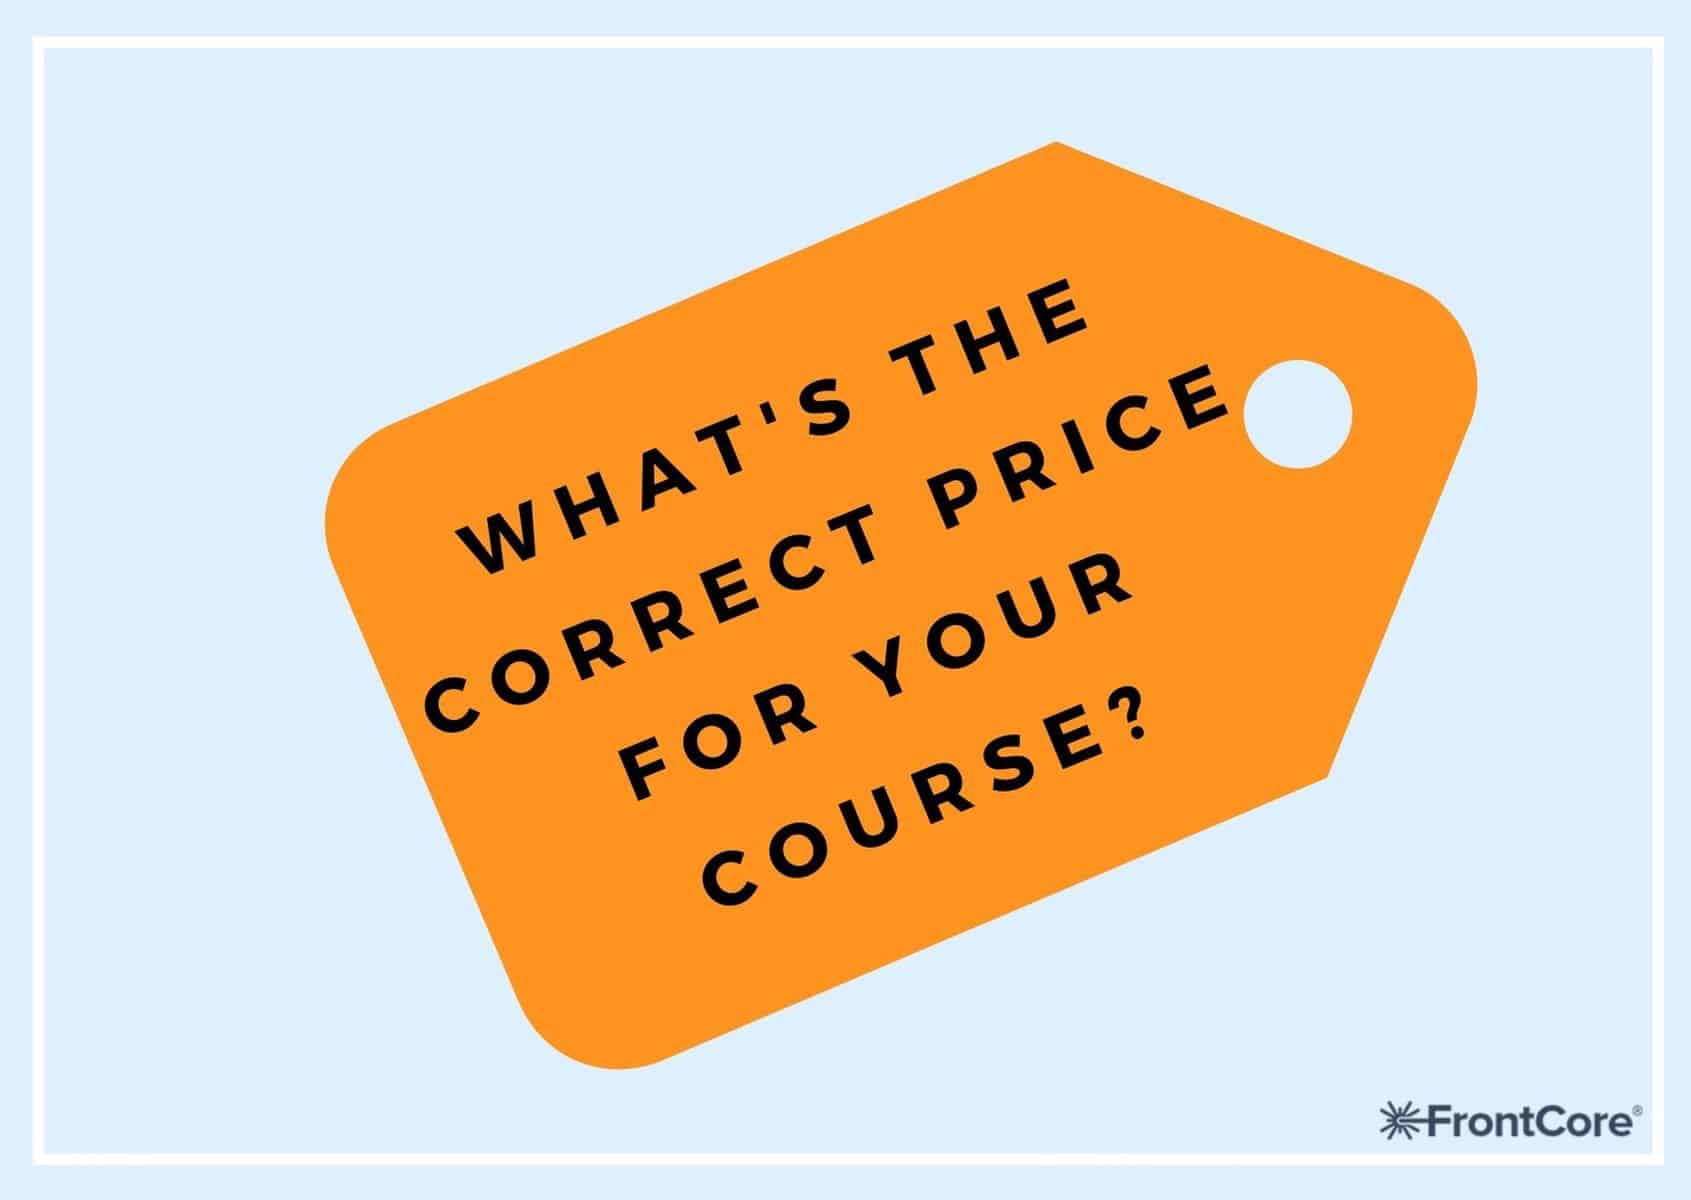 FrontCore sharing how you find the best price for your course